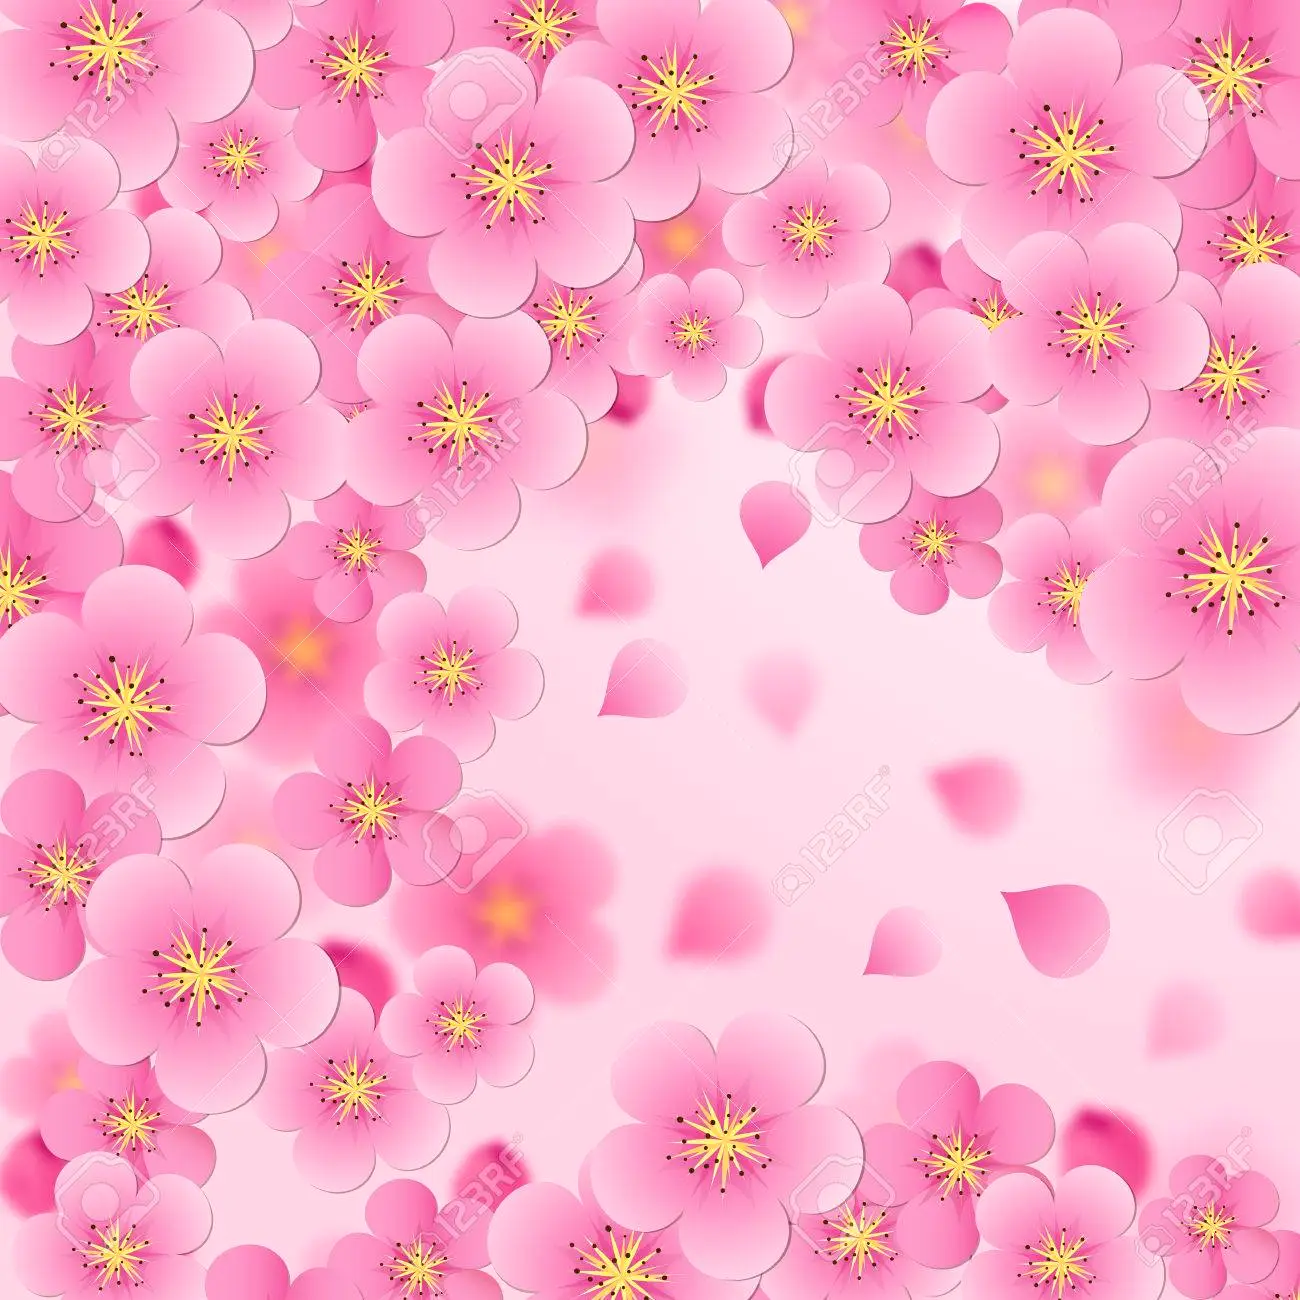 Elegant soft pink color cherry flowers sakura background royalty free svg cliparts vectors and stock illustration image